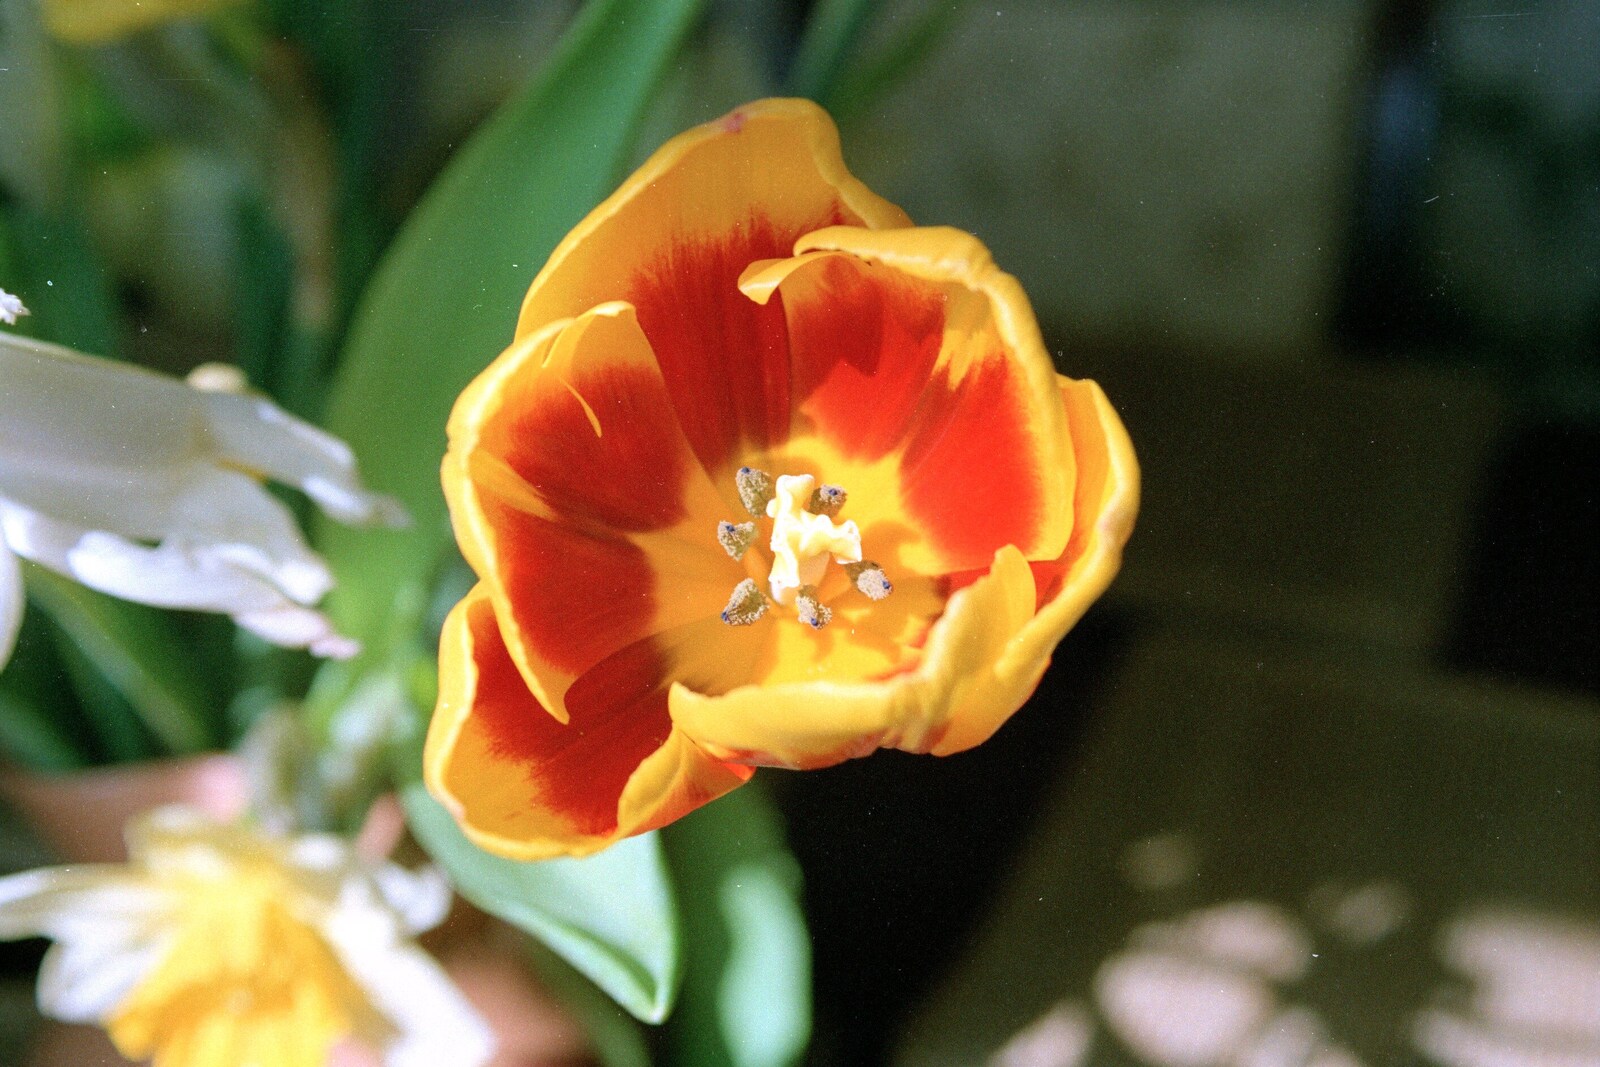 A tulip from Mother's 40th, Burton, Christchurch, Dorset - 18th April 1987